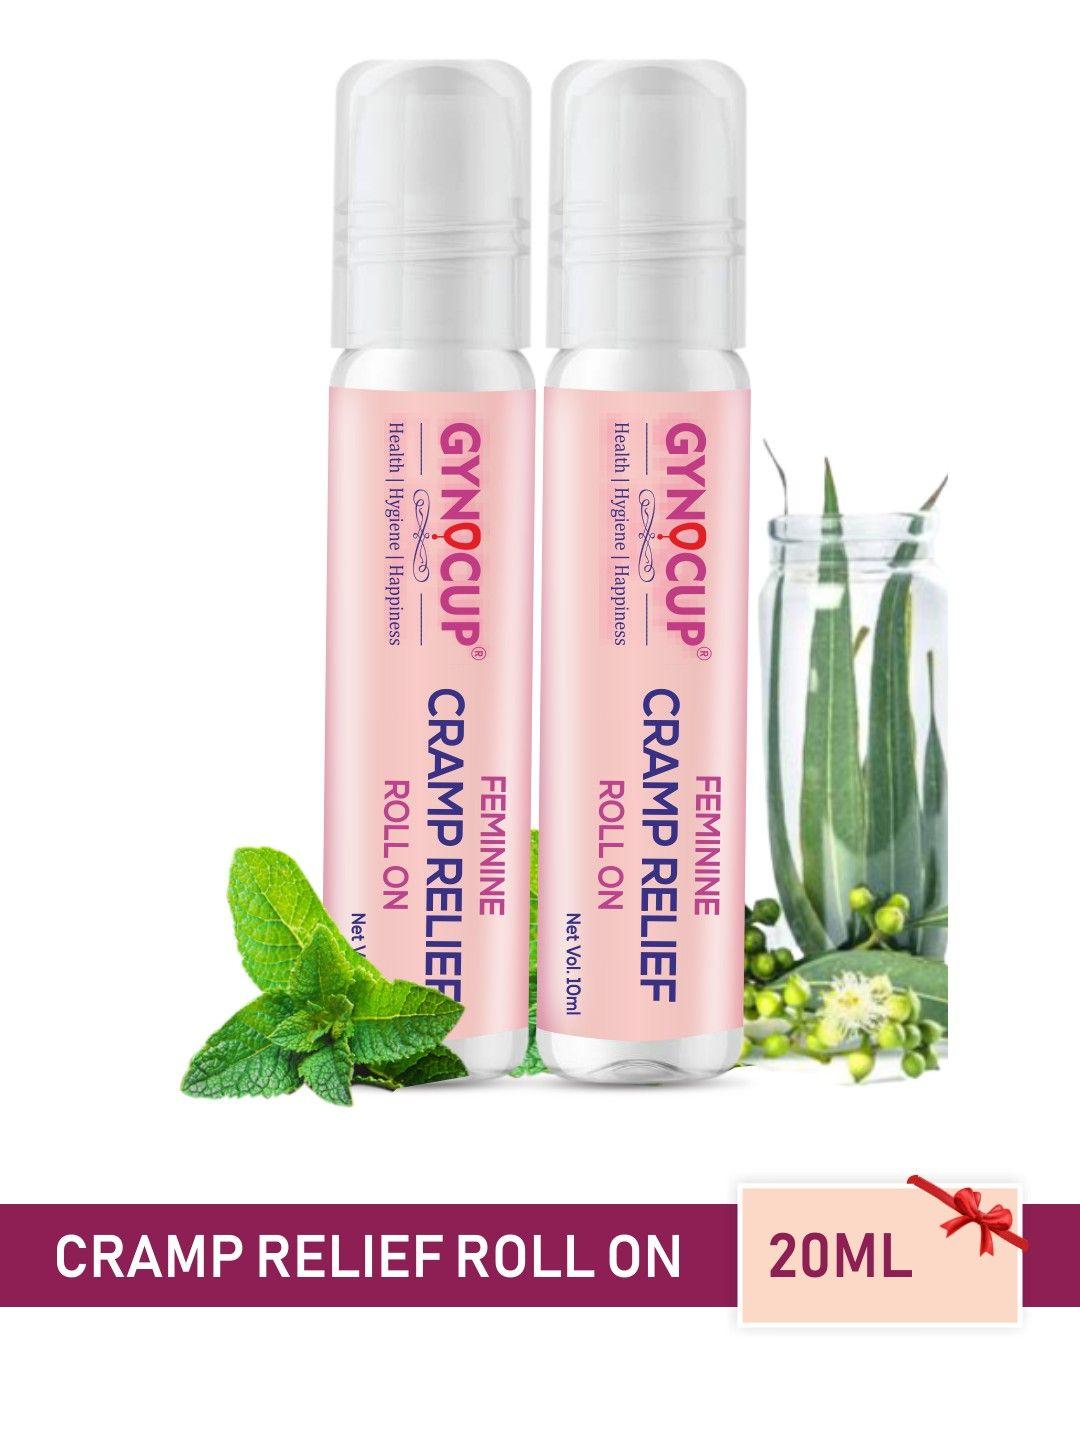 gynocup set of 2 feminine cramp relief roll-on all in one for periods & lower back pain